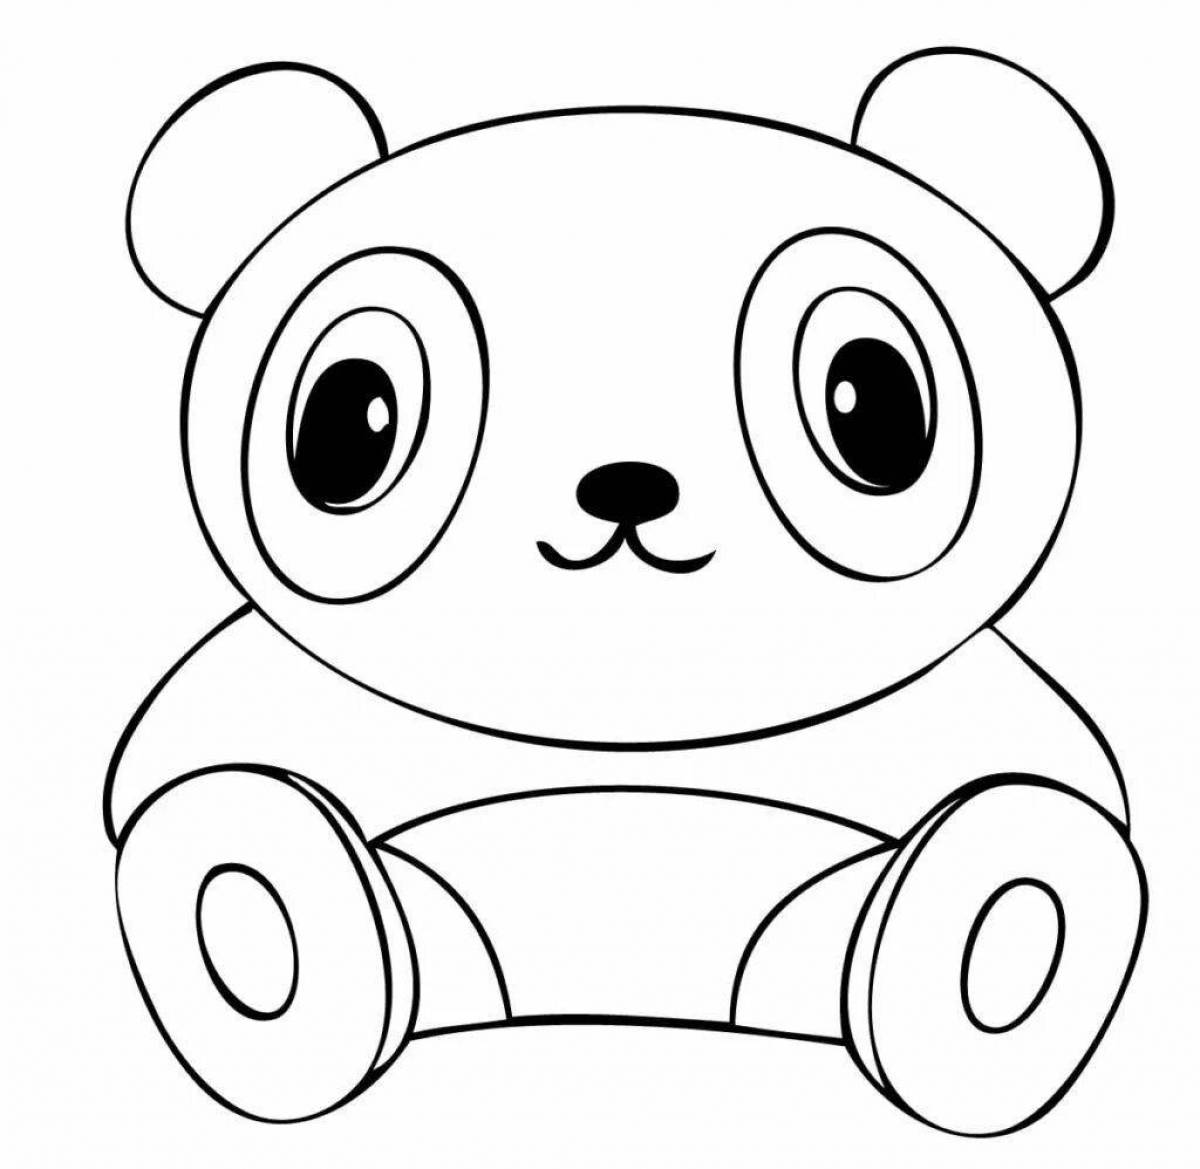 Blessed panda coloring pages for girls